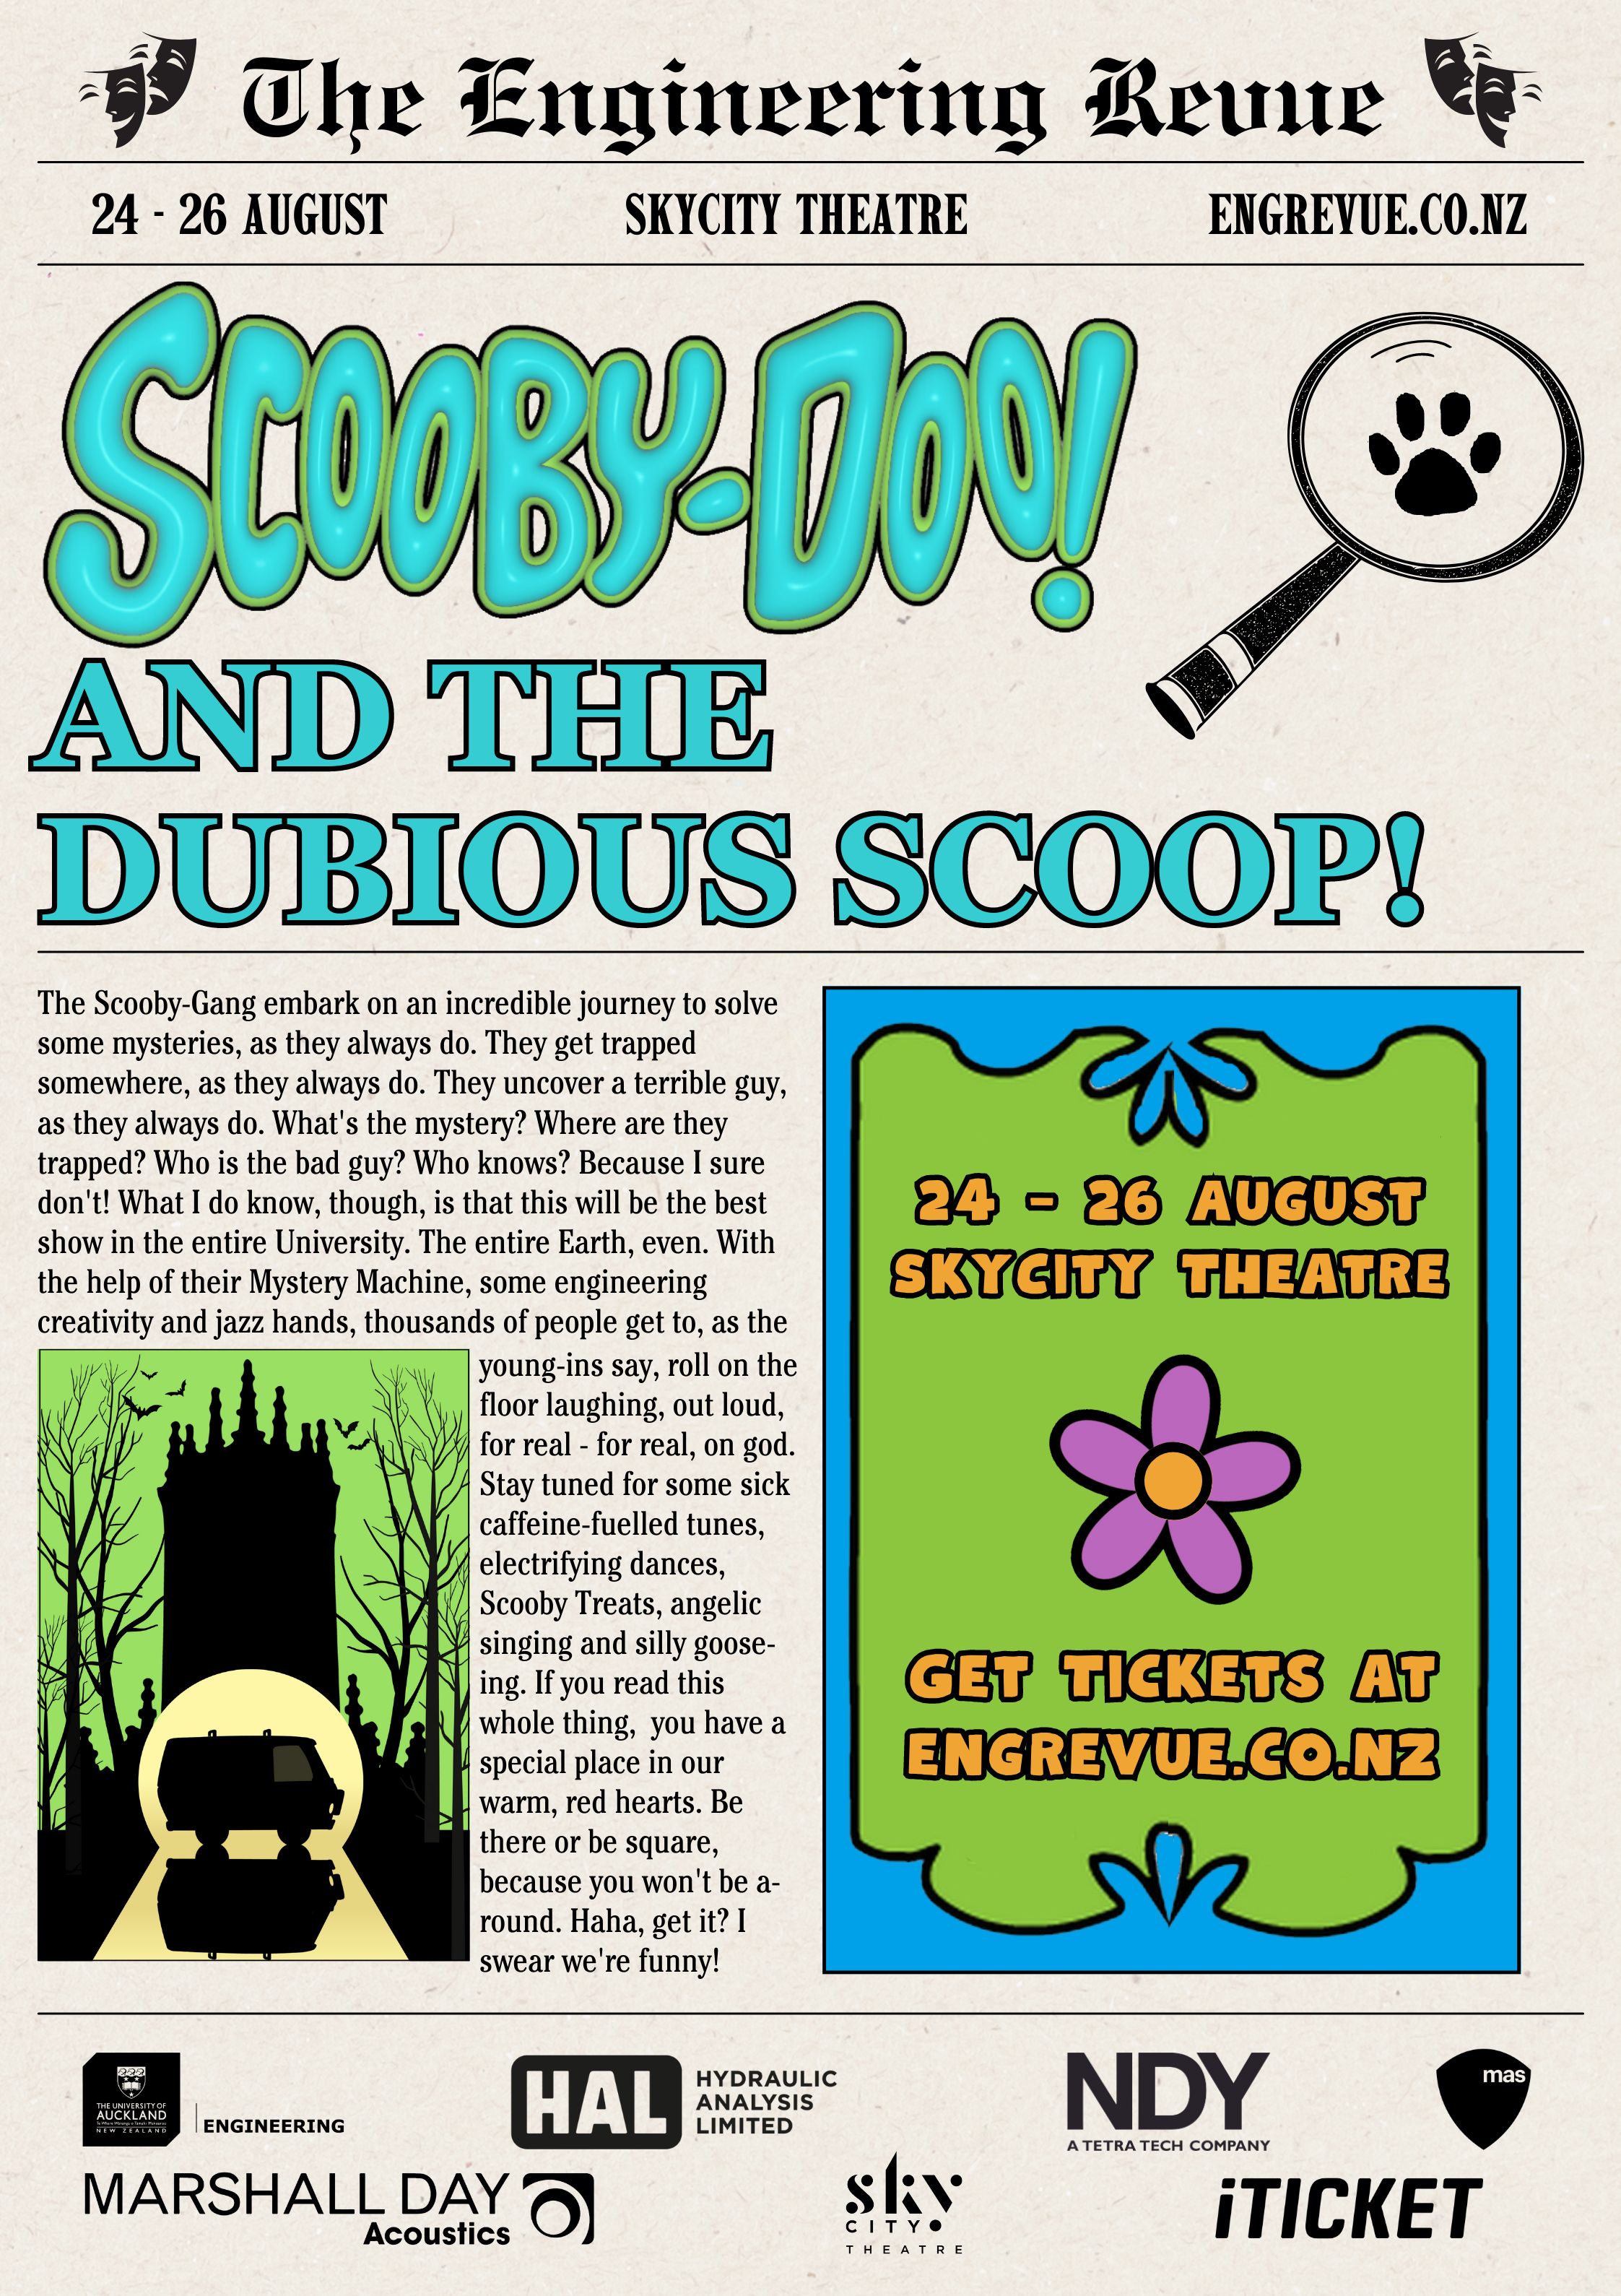 SCOOBY-DOO AND THE DUBIOUS SCOOP